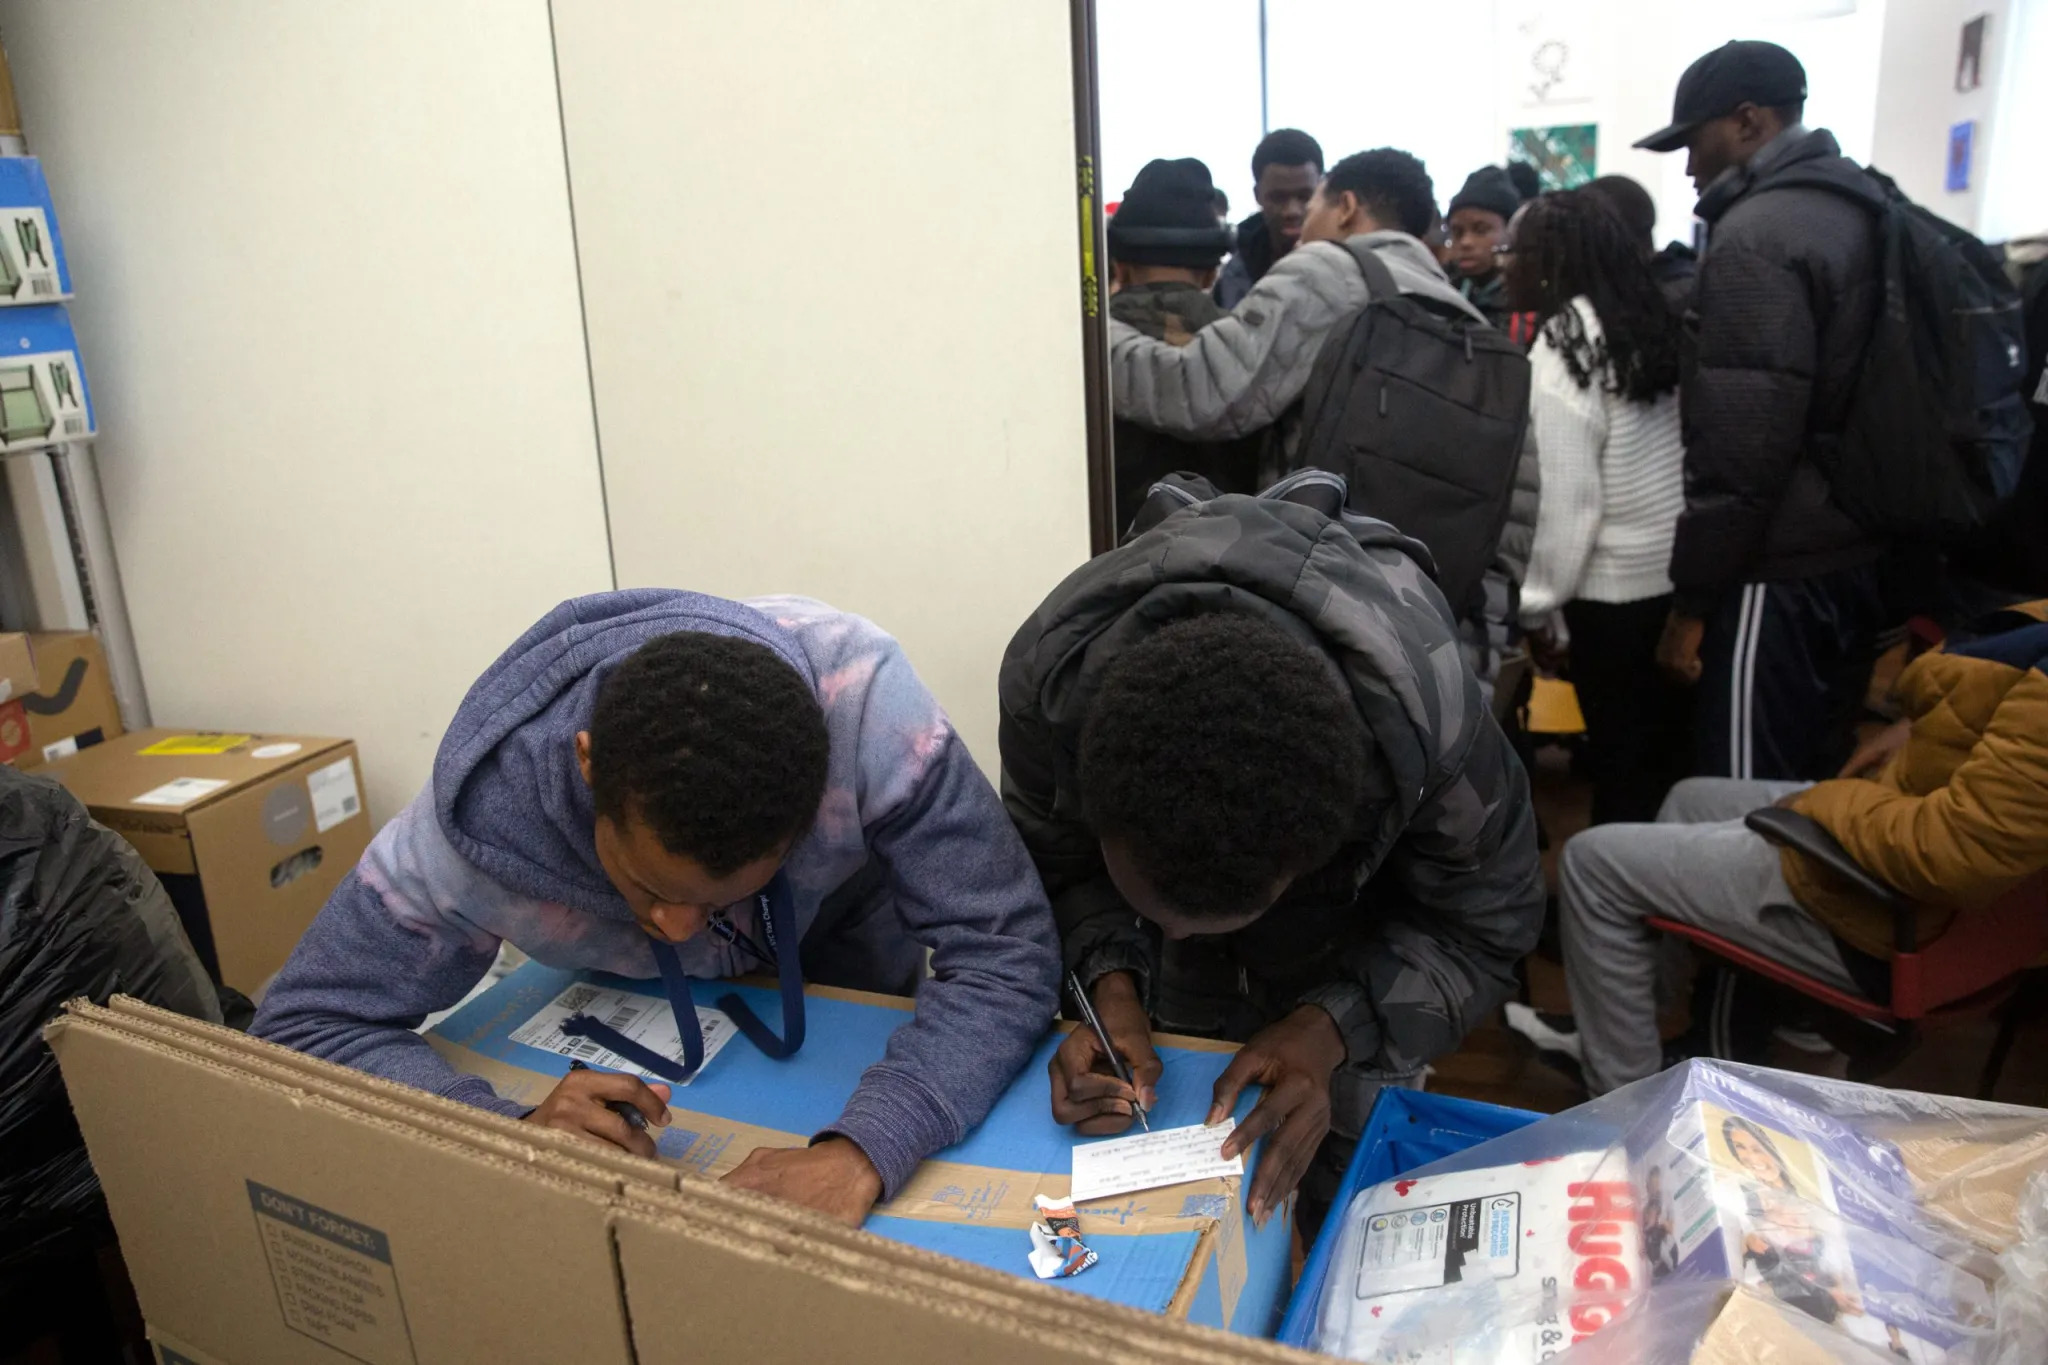 NYC homeless youth and migrants: Two black males fill out forms using the tops of large cardboard boxes for desks while several other people stand crowded together in another room in the background